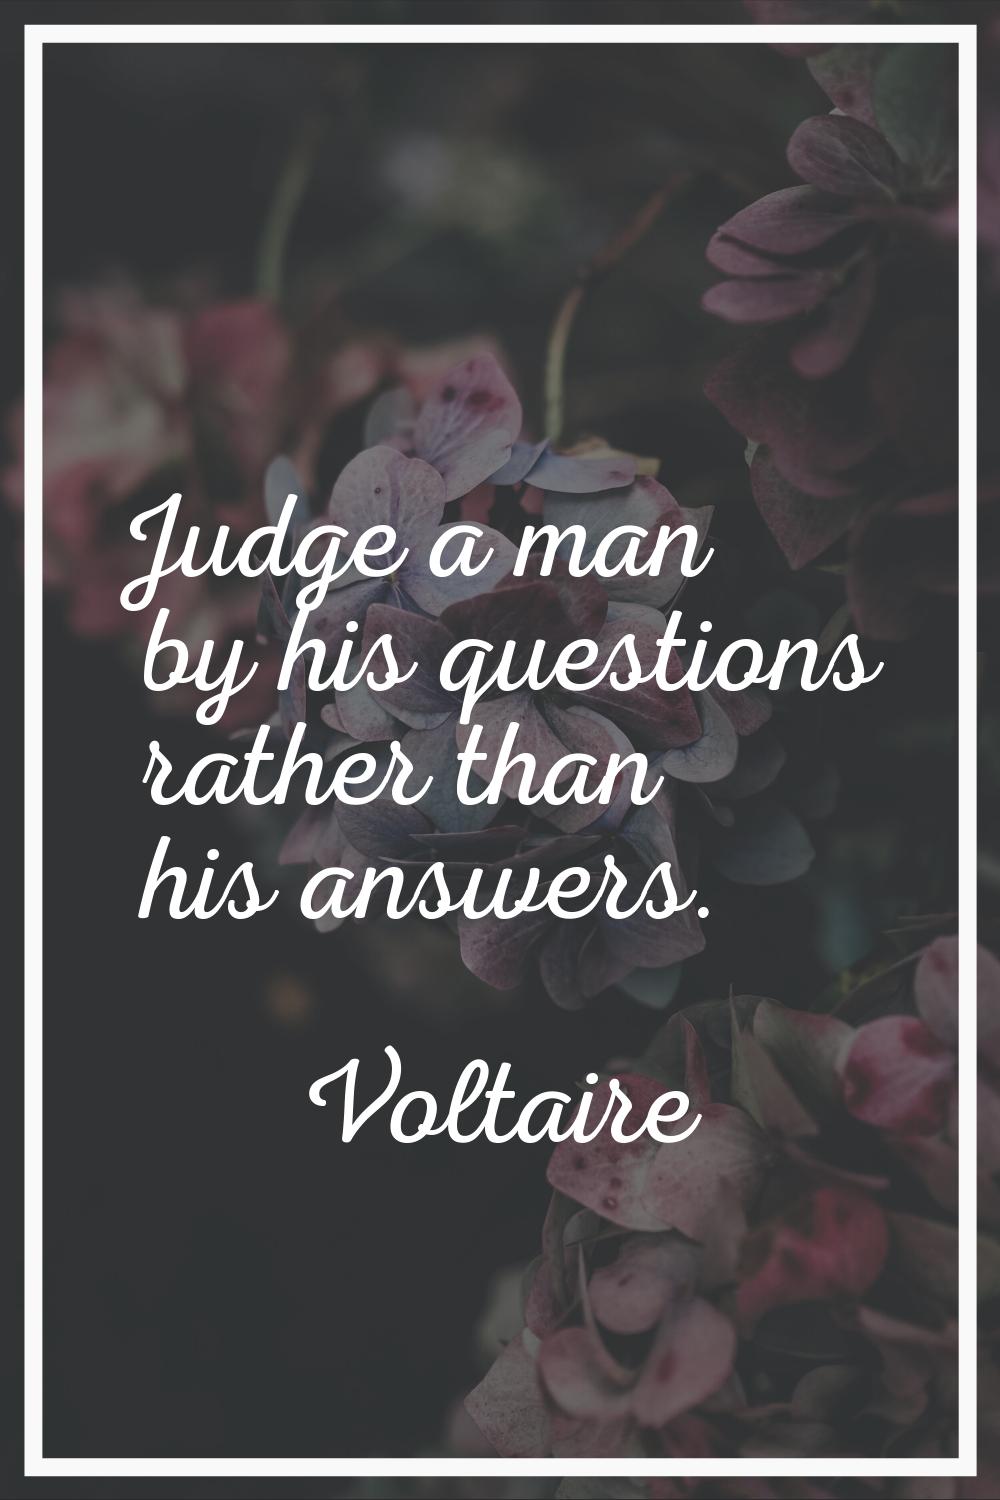 Judge a man by his questions rather than his answers.